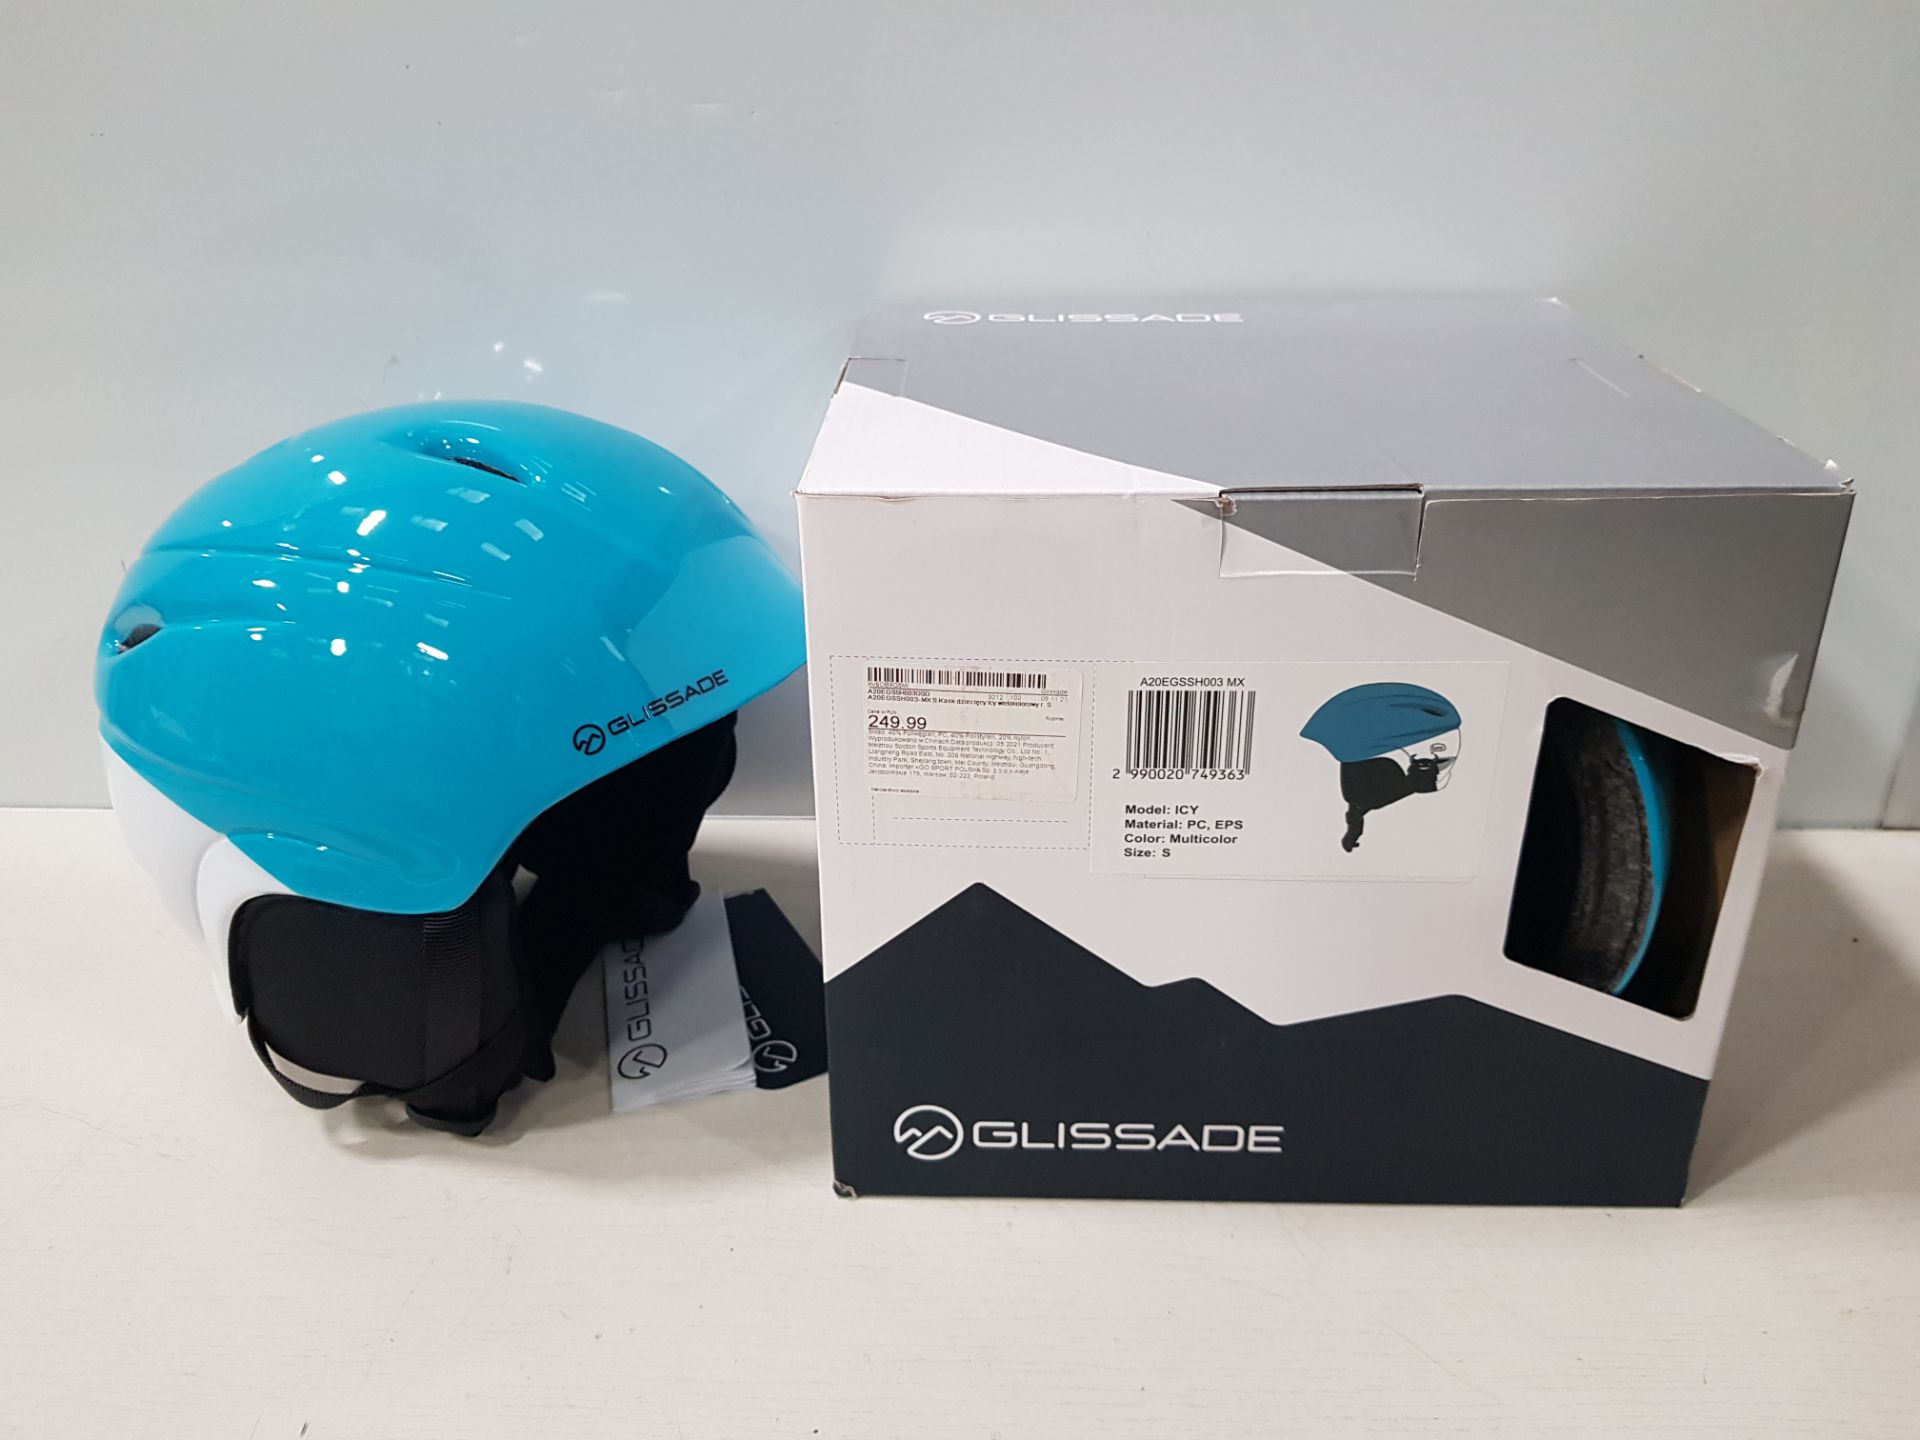 20 X BRAND NEW GLISSADE HELMETS IN SIZES XS-S-M - MODEL ICY - MULTI COLOUR (SOME BOXES MAYBE